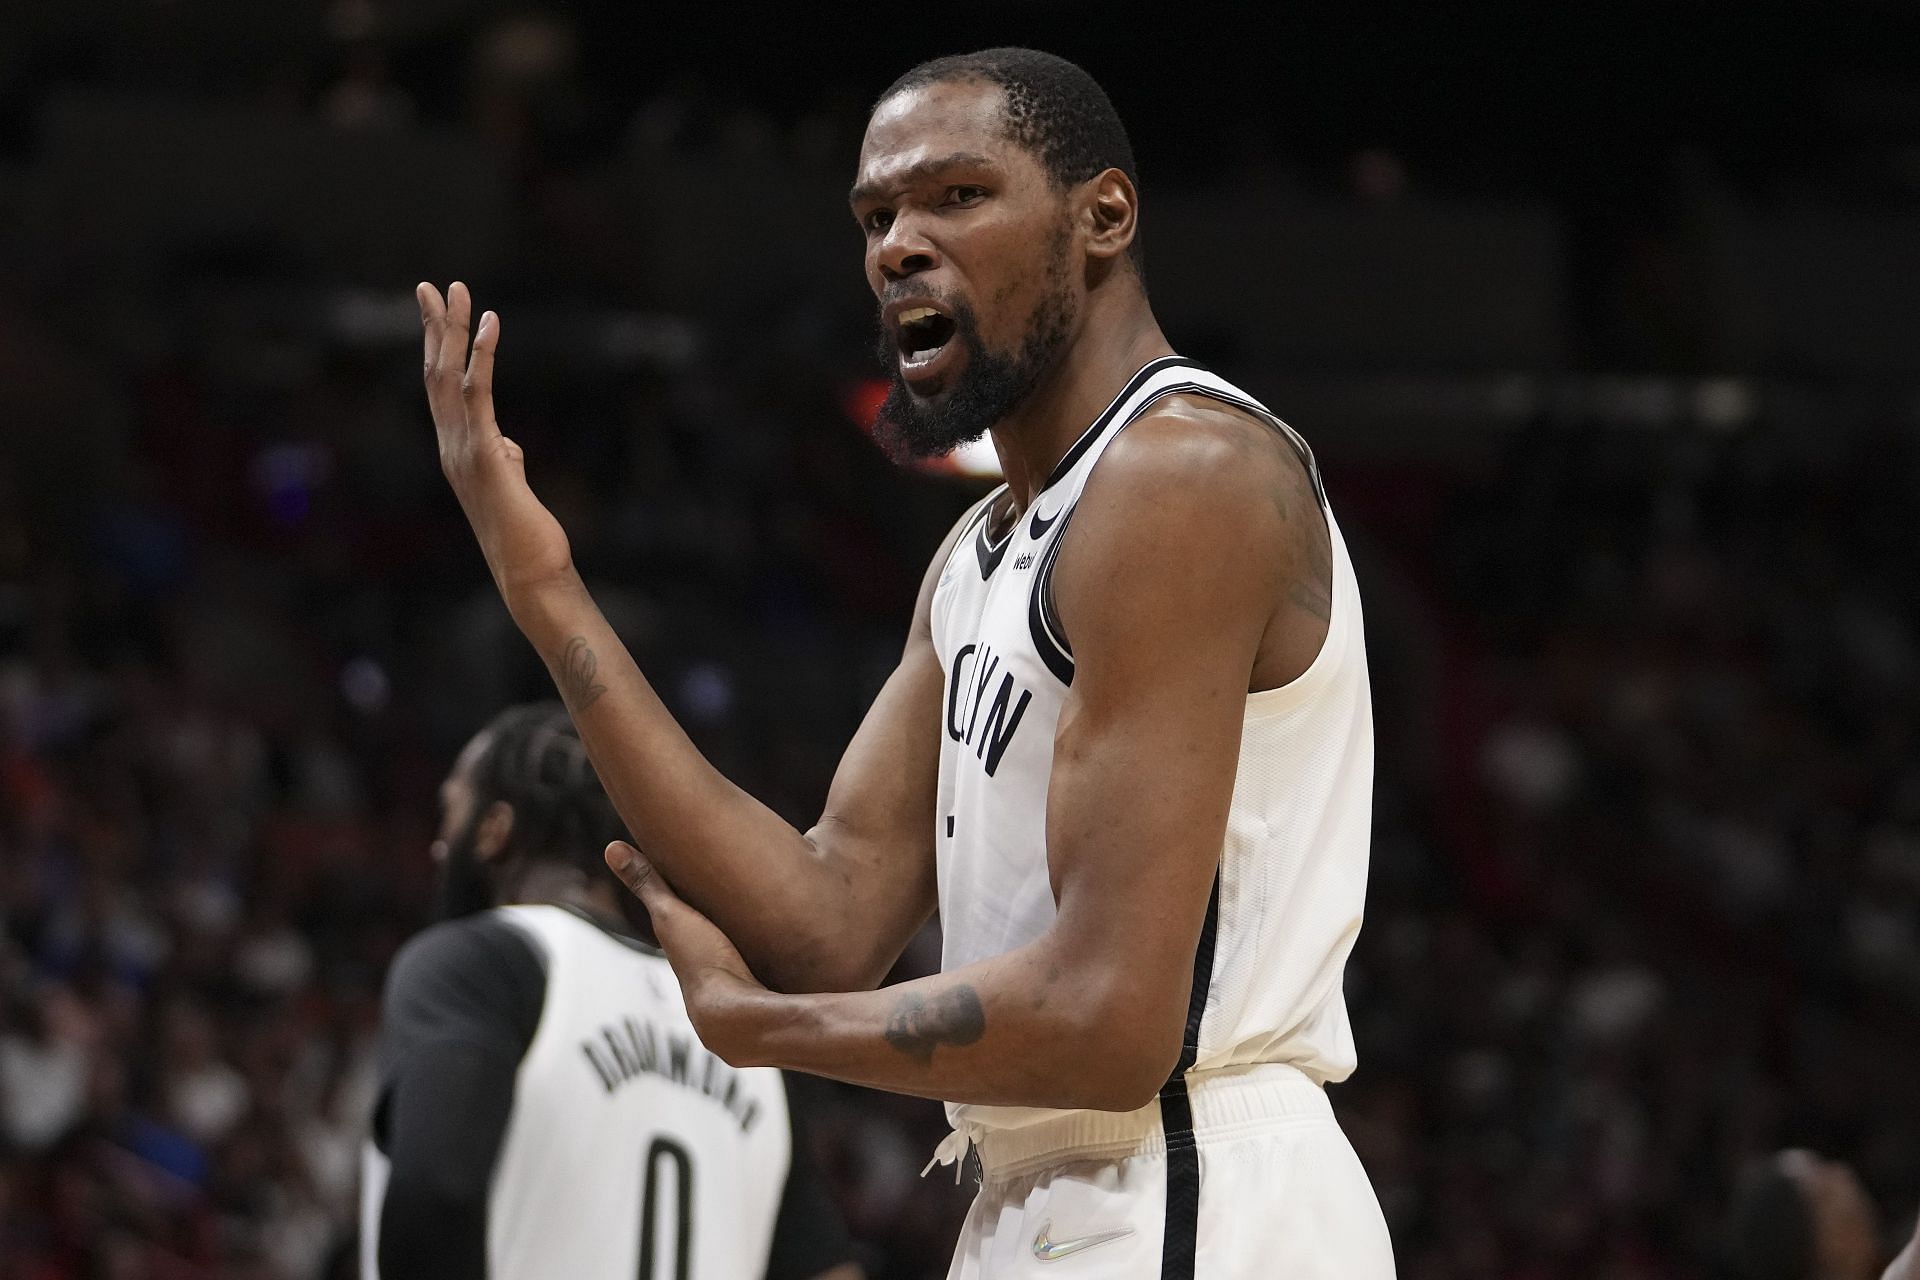 Kevin Durant scored 23 points as he led the Brooklyn Nets to an easy win vs the Miami Heat on Saturday